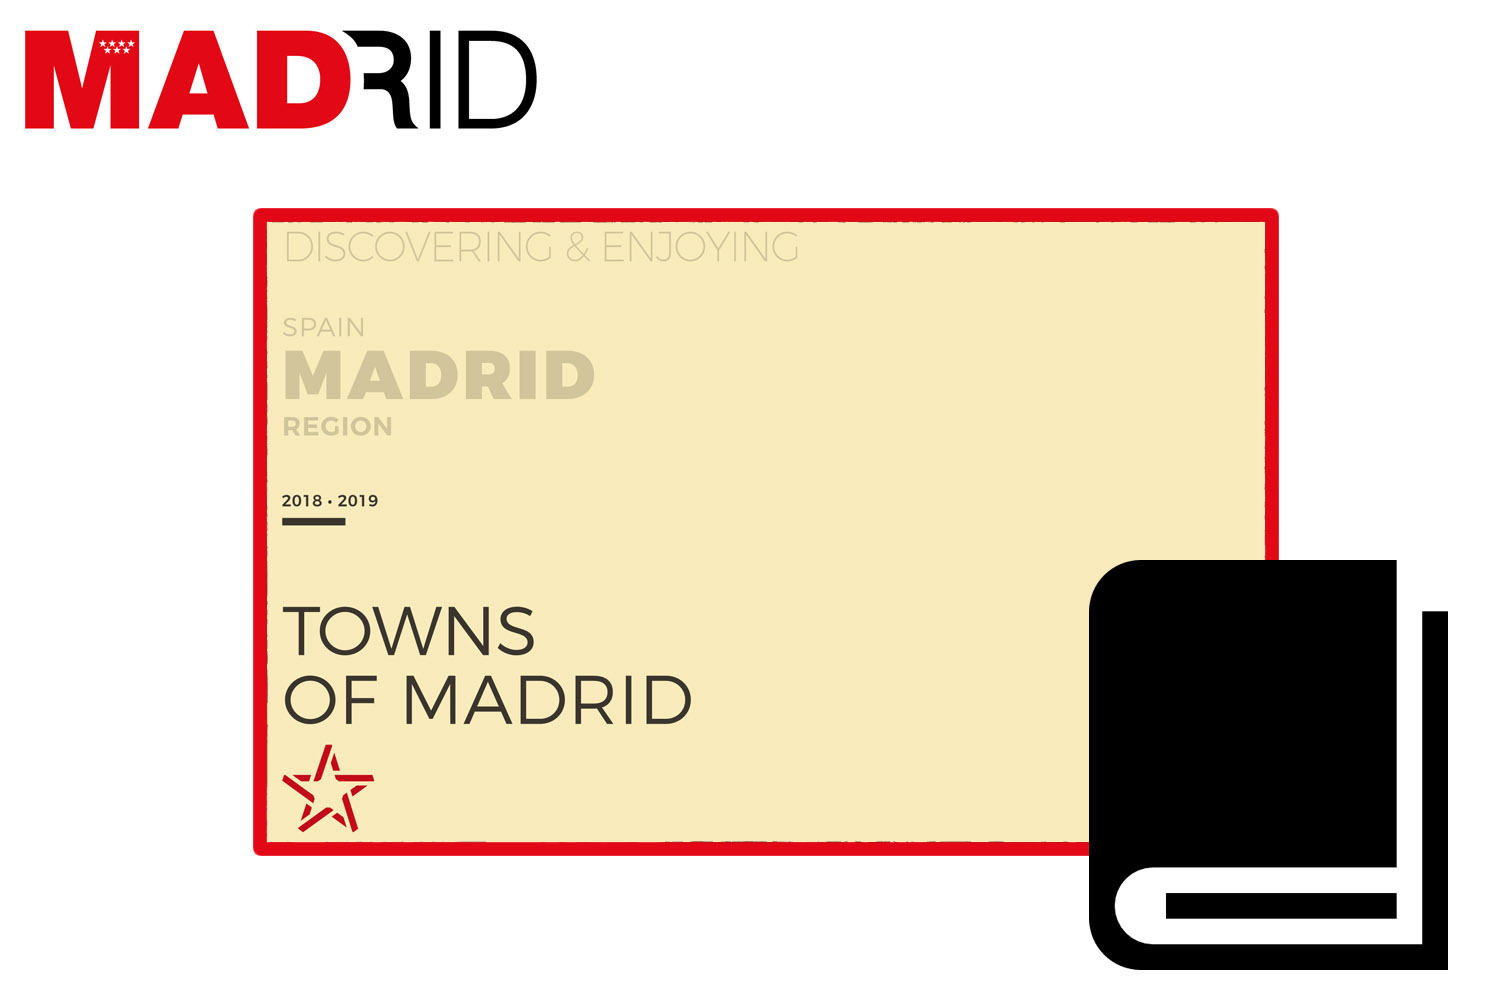 Towns of Madrid